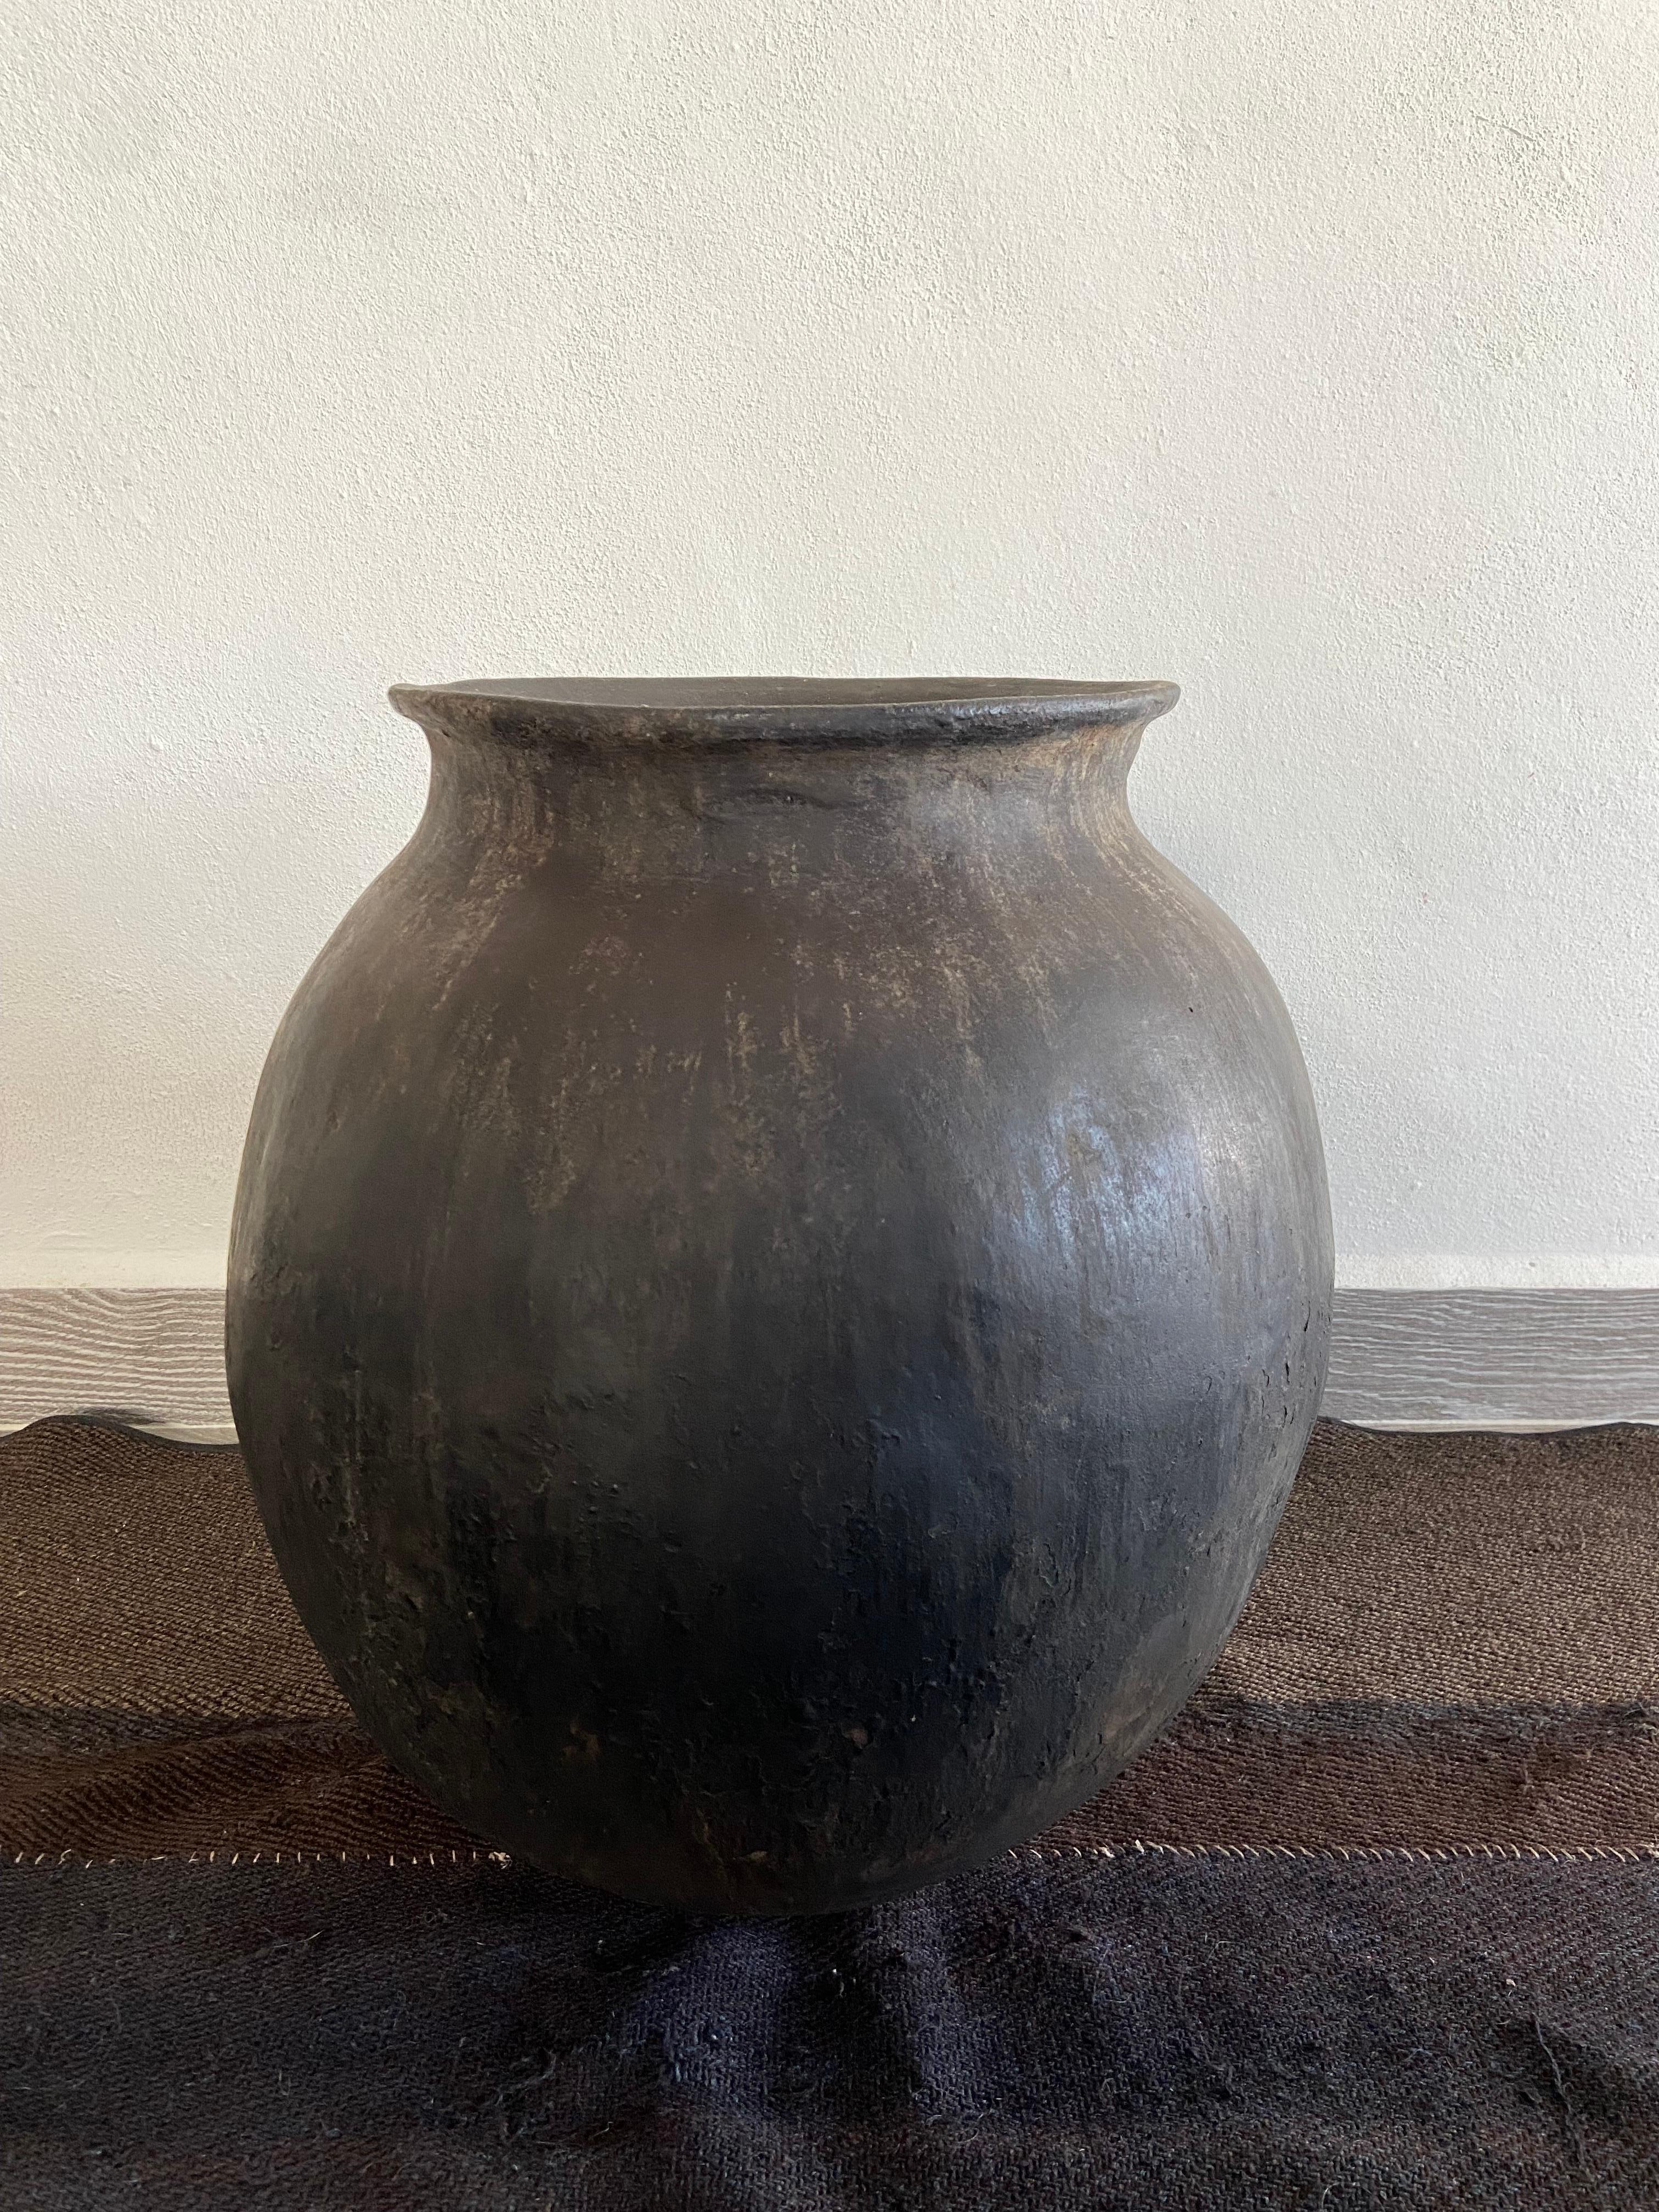 Fired Early 20th Century Terracotta Water Jar from Mexico